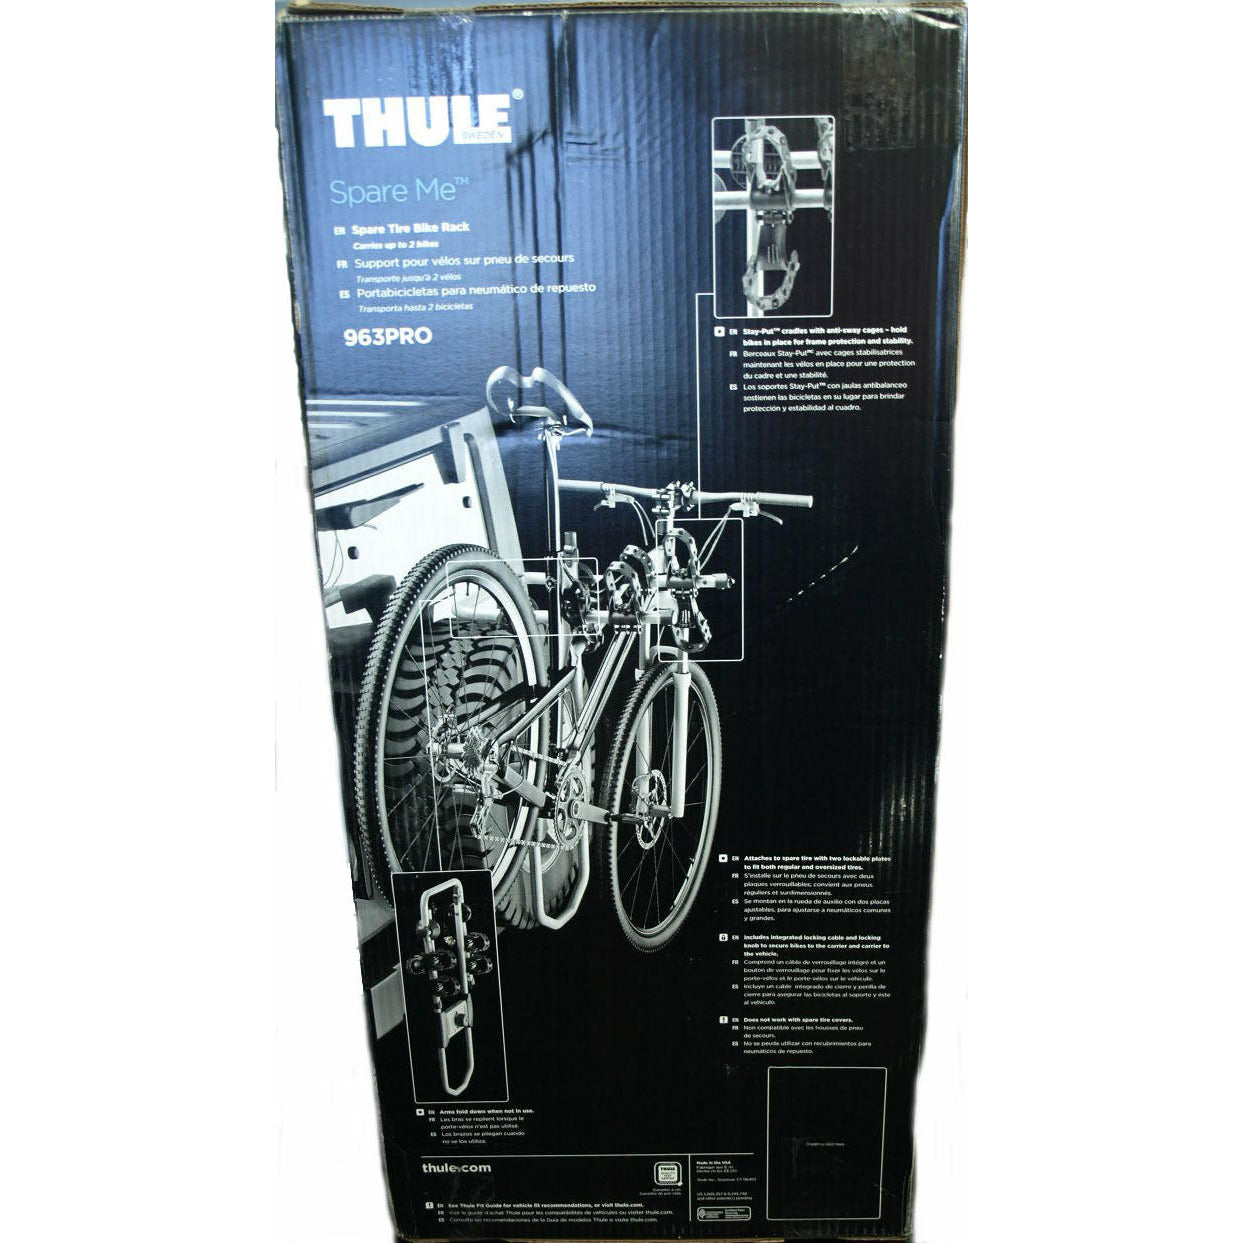 Thule 963PRO Spare Me Spare Tire Rack 2 Bike Travel Holder 963 Bicycle Carrier